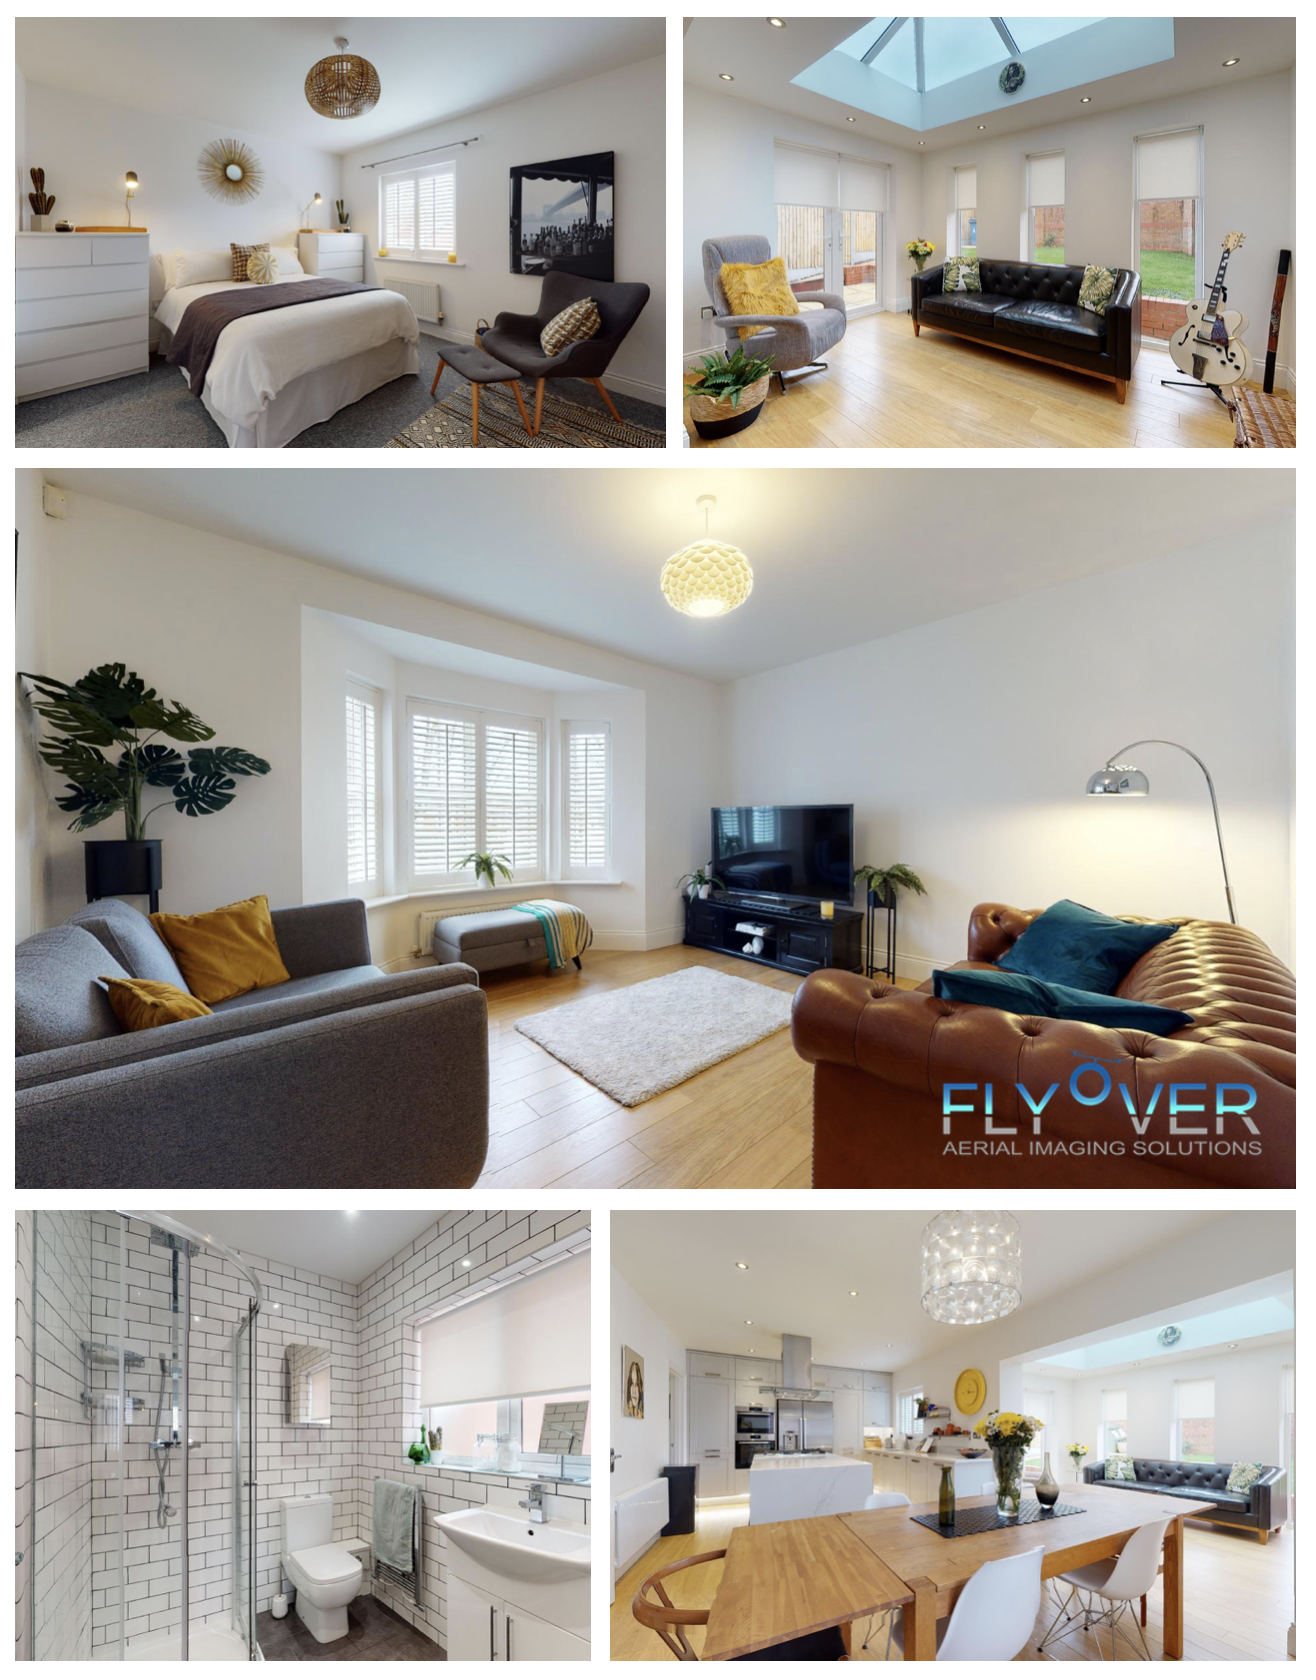 Propety Photography, EPC, Floor Plan Package Offer! From £125! Image